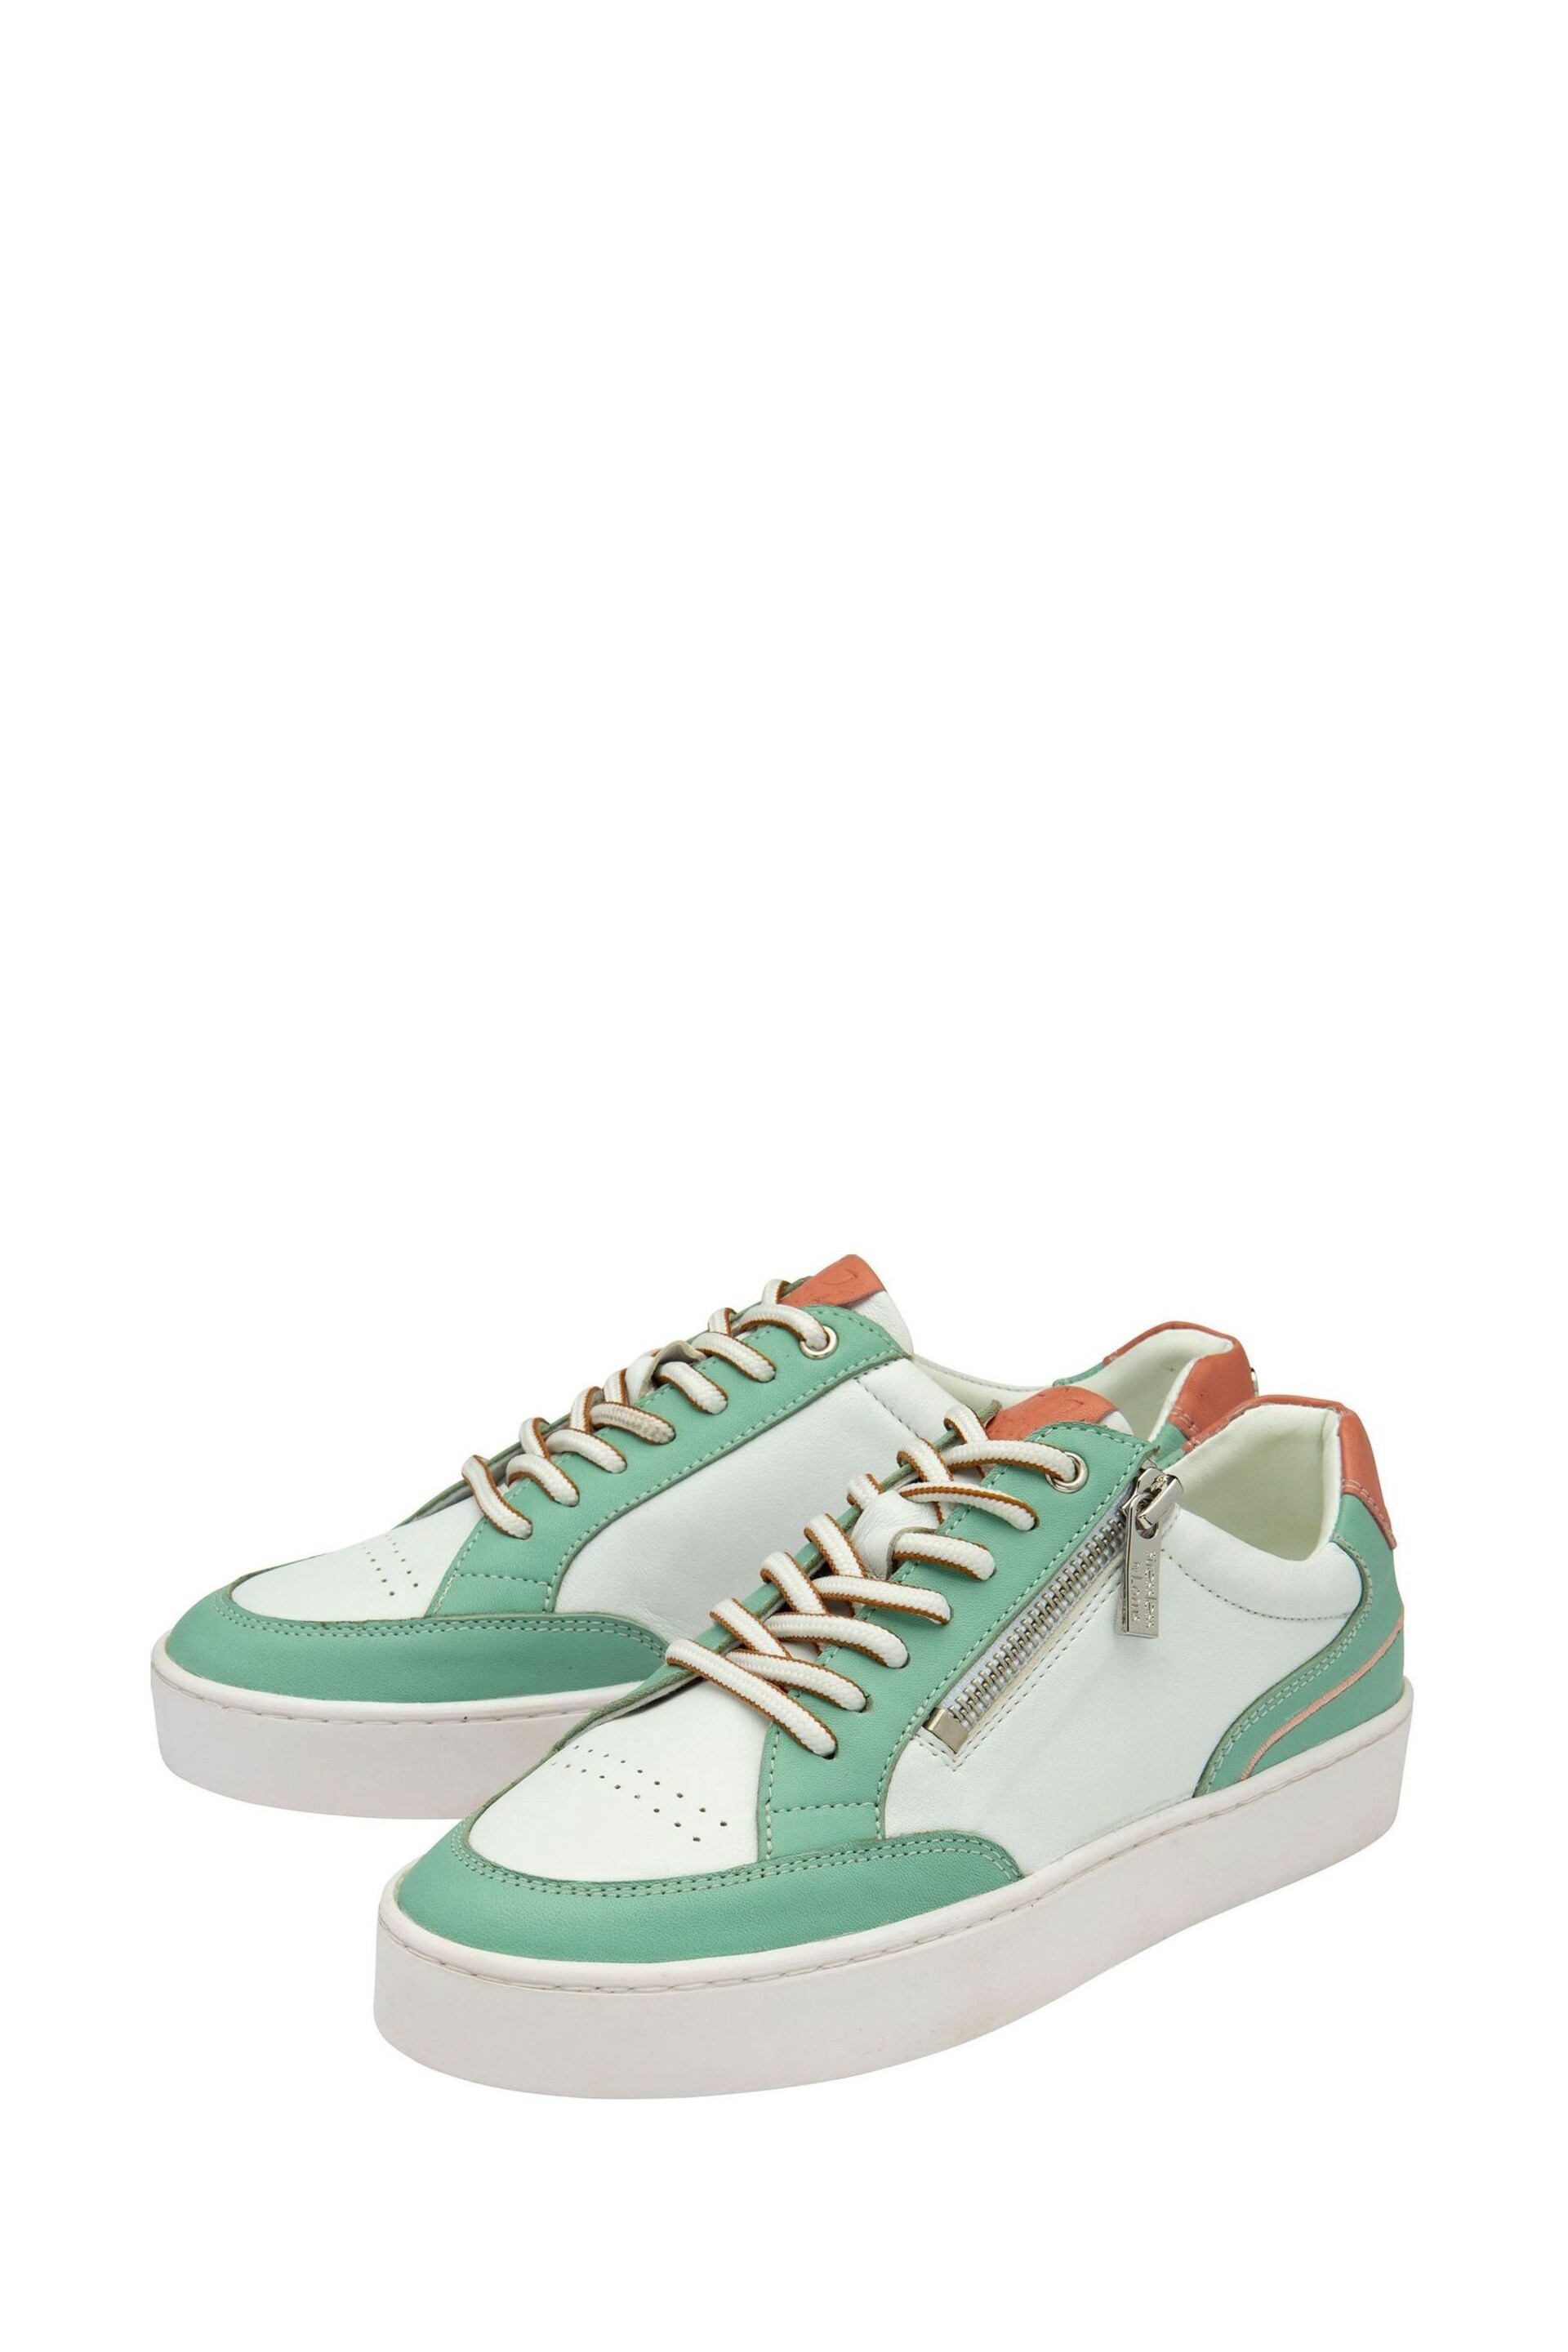 Lotus Green Leather Zip-Up Trainers - Image 2 of 4